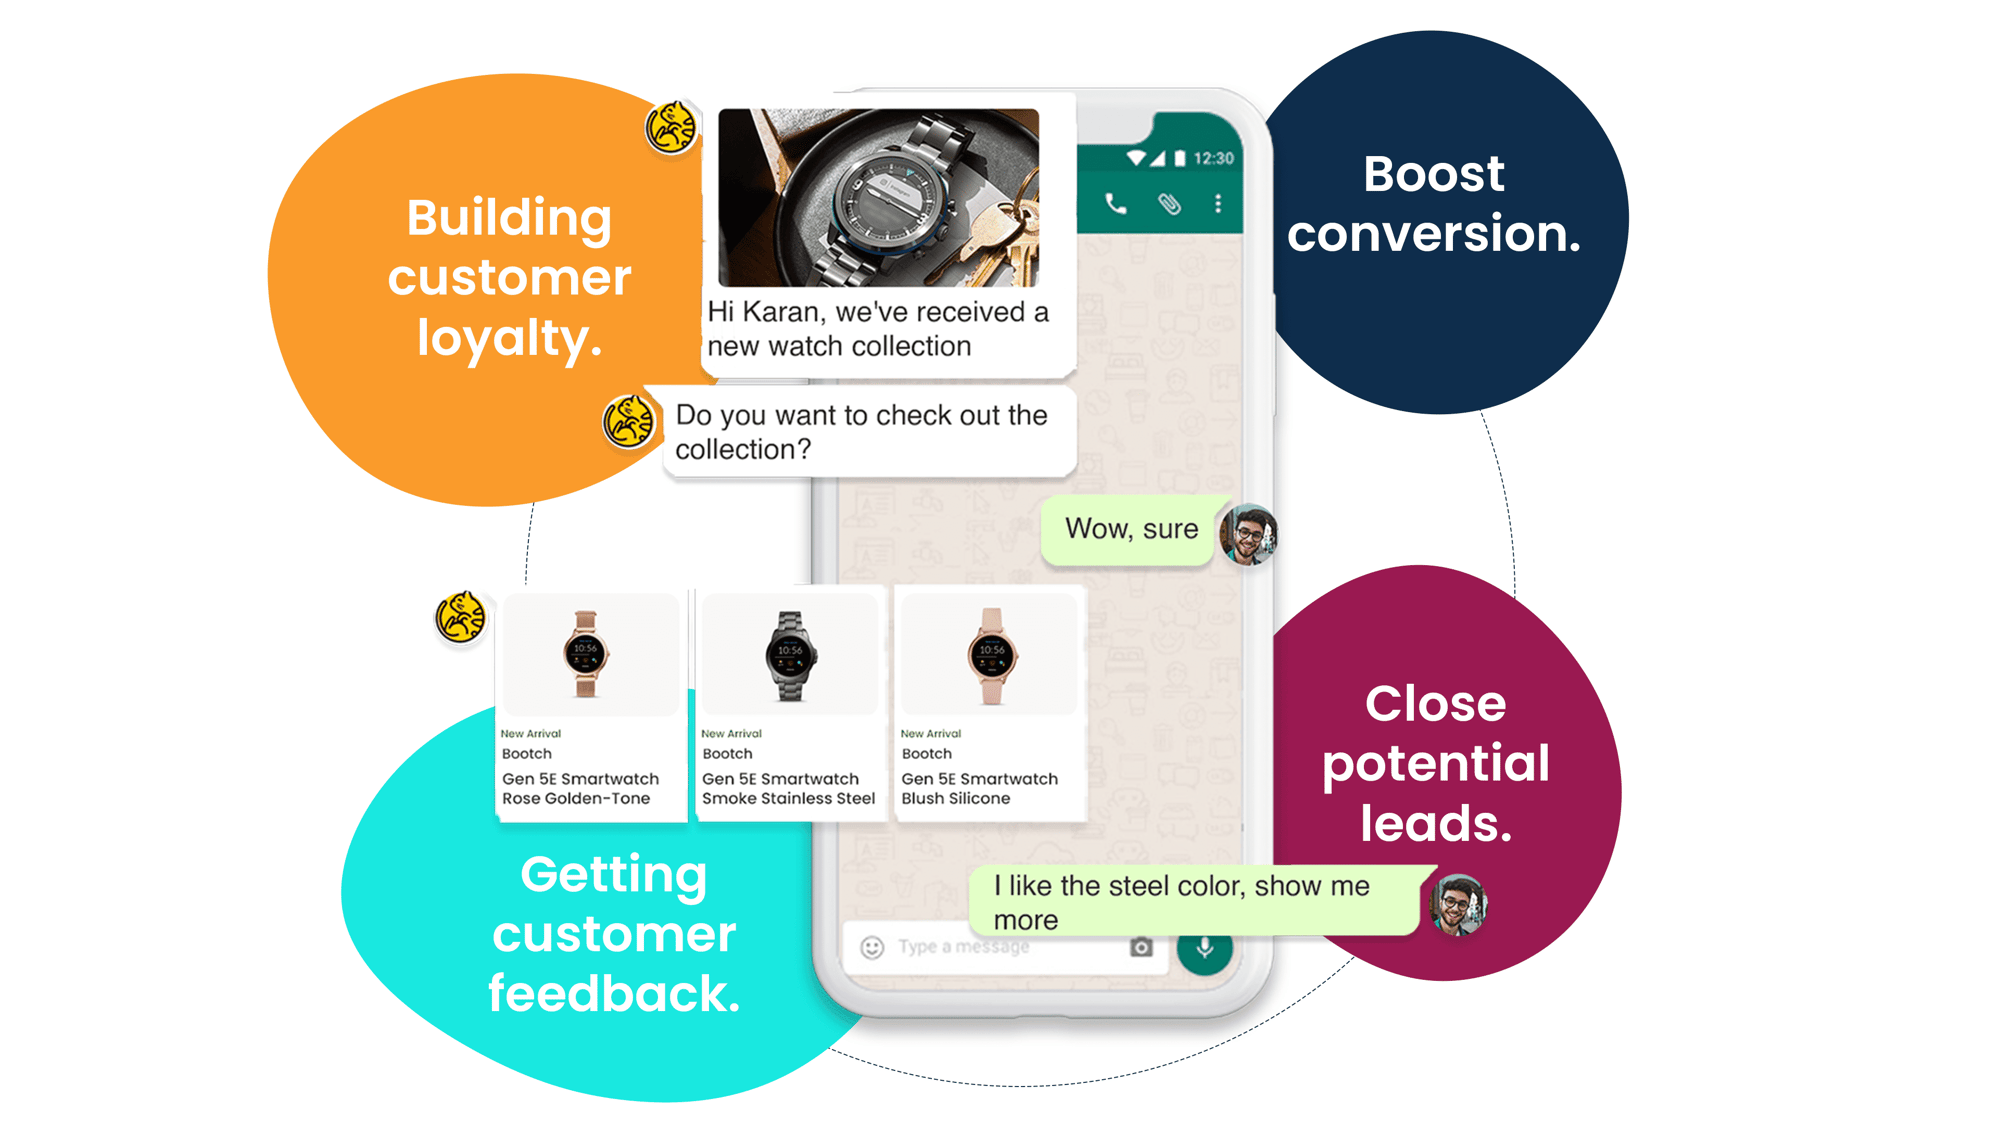 Why should brands opt for conversational commerce?